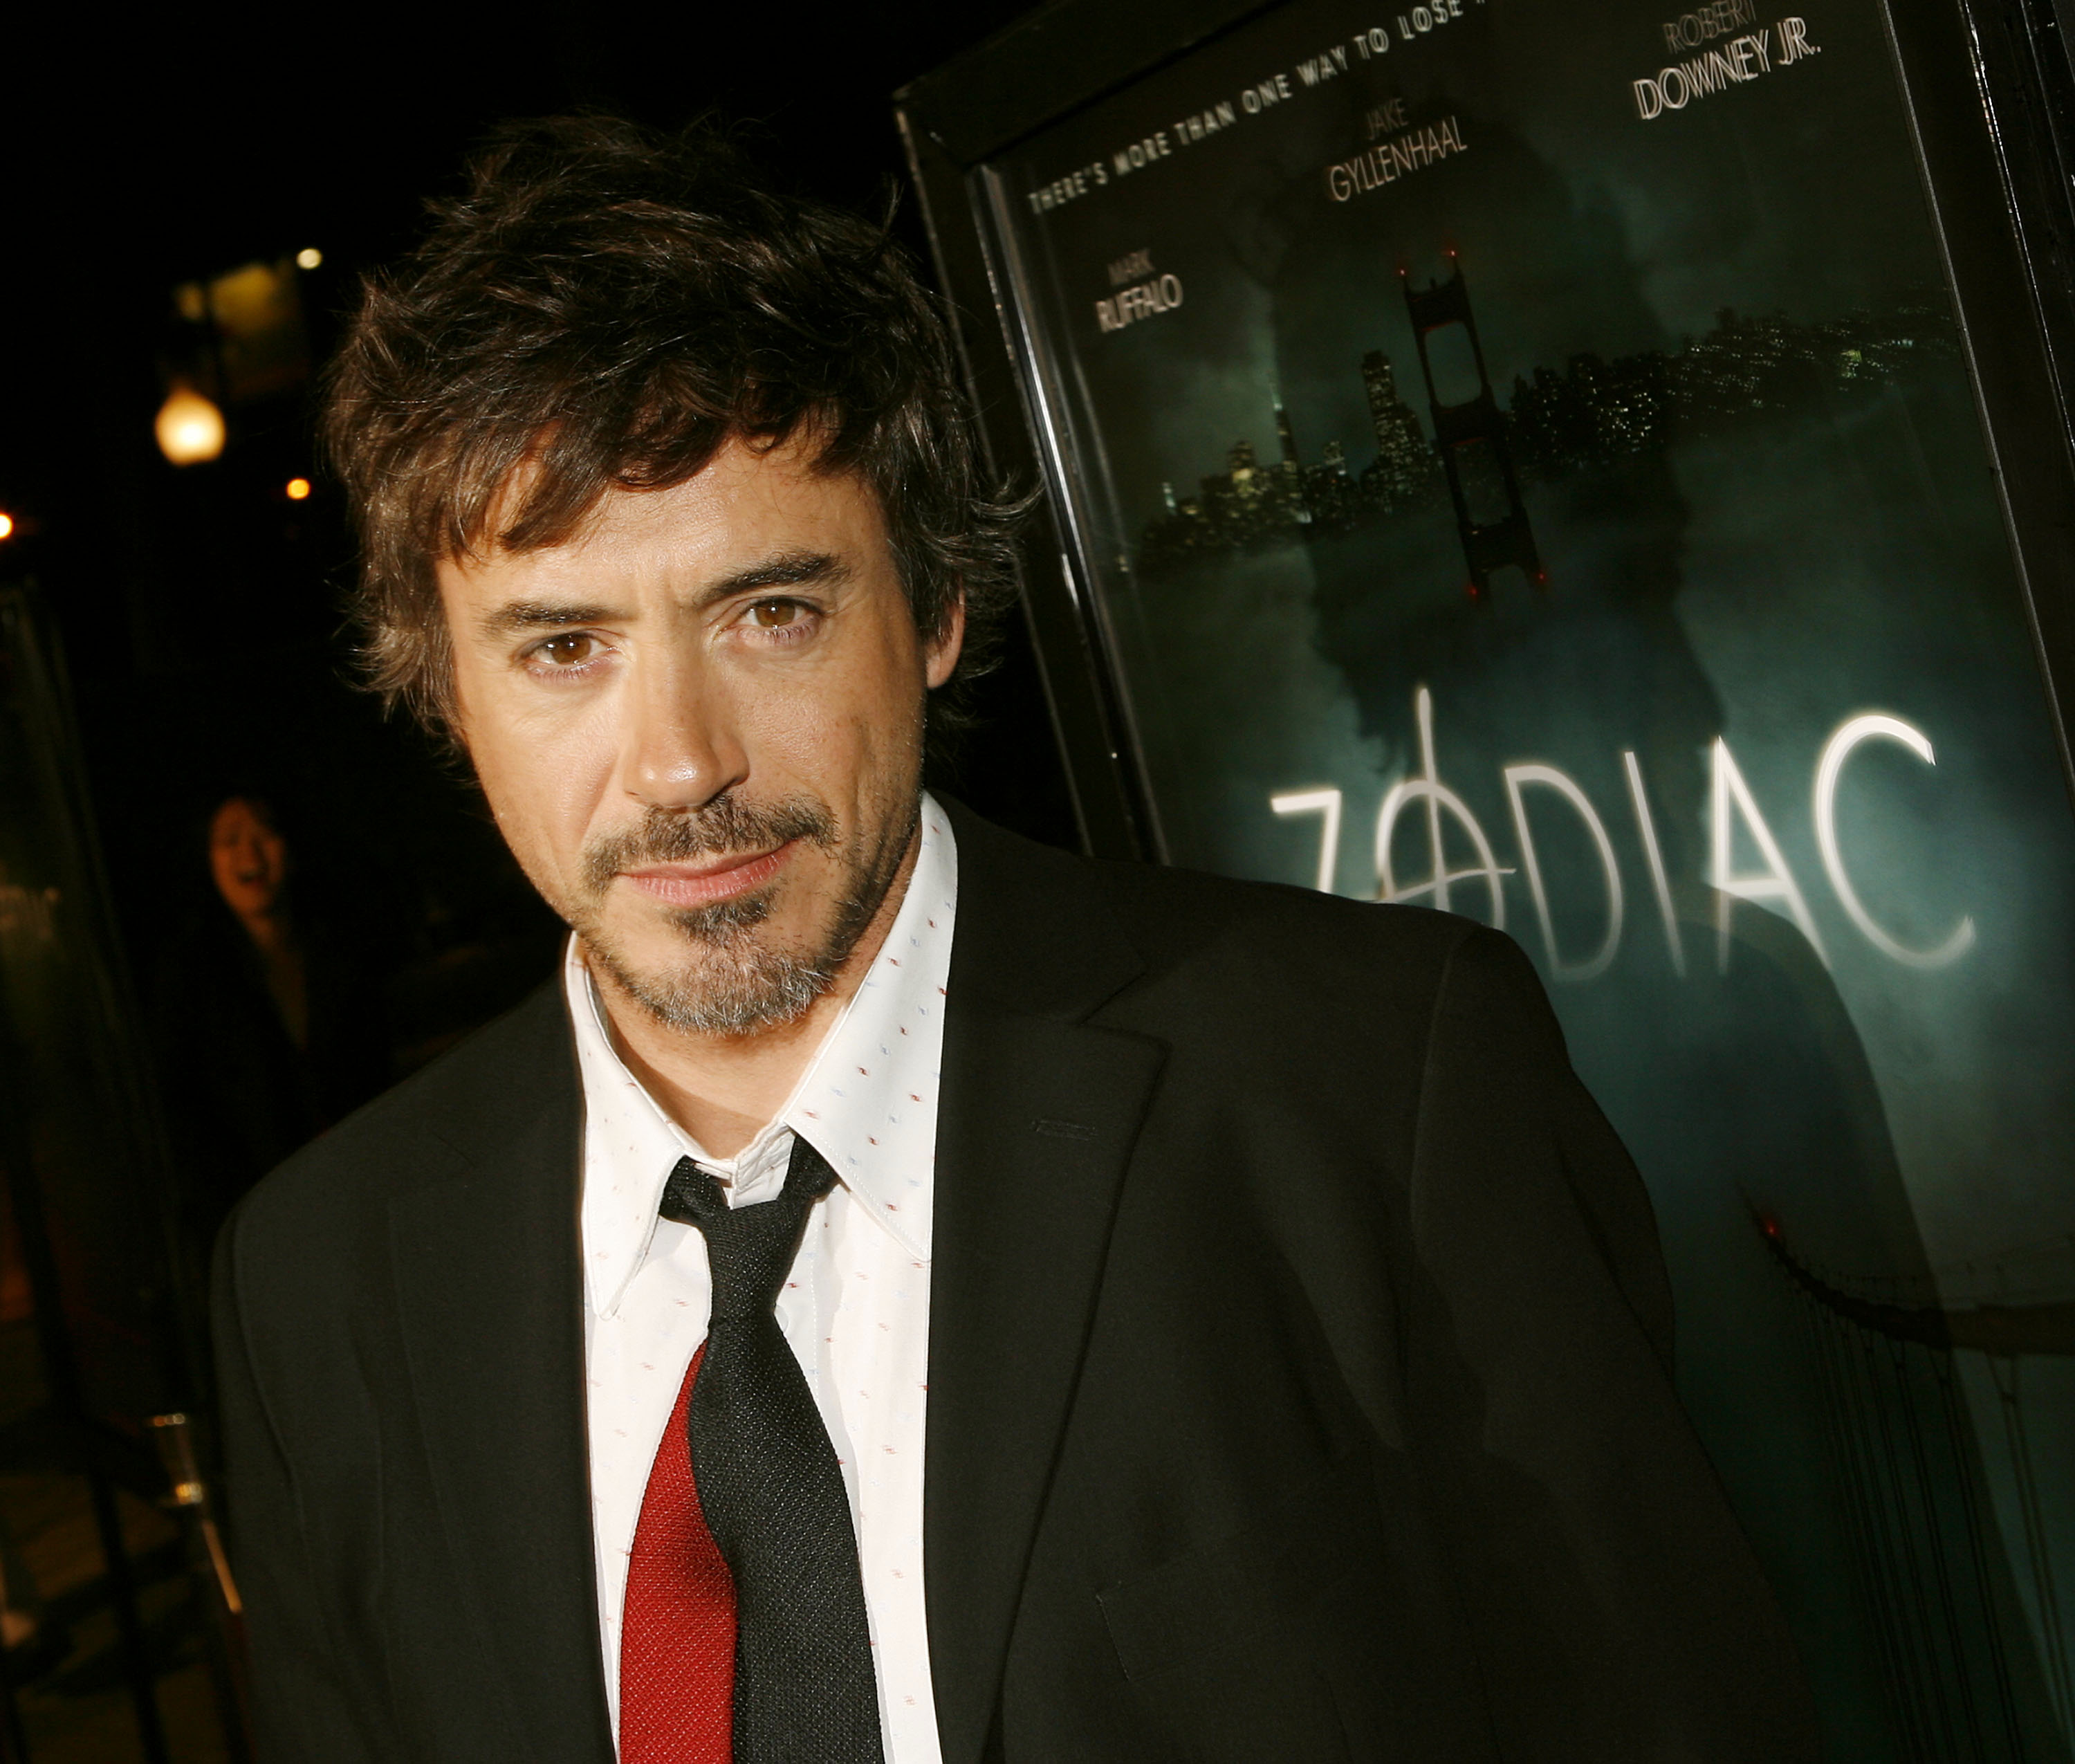 Actor Robert Downey Jr. arrives at the premiere of Paramount Picture's 'Zodiac' at the Paramount Theatre